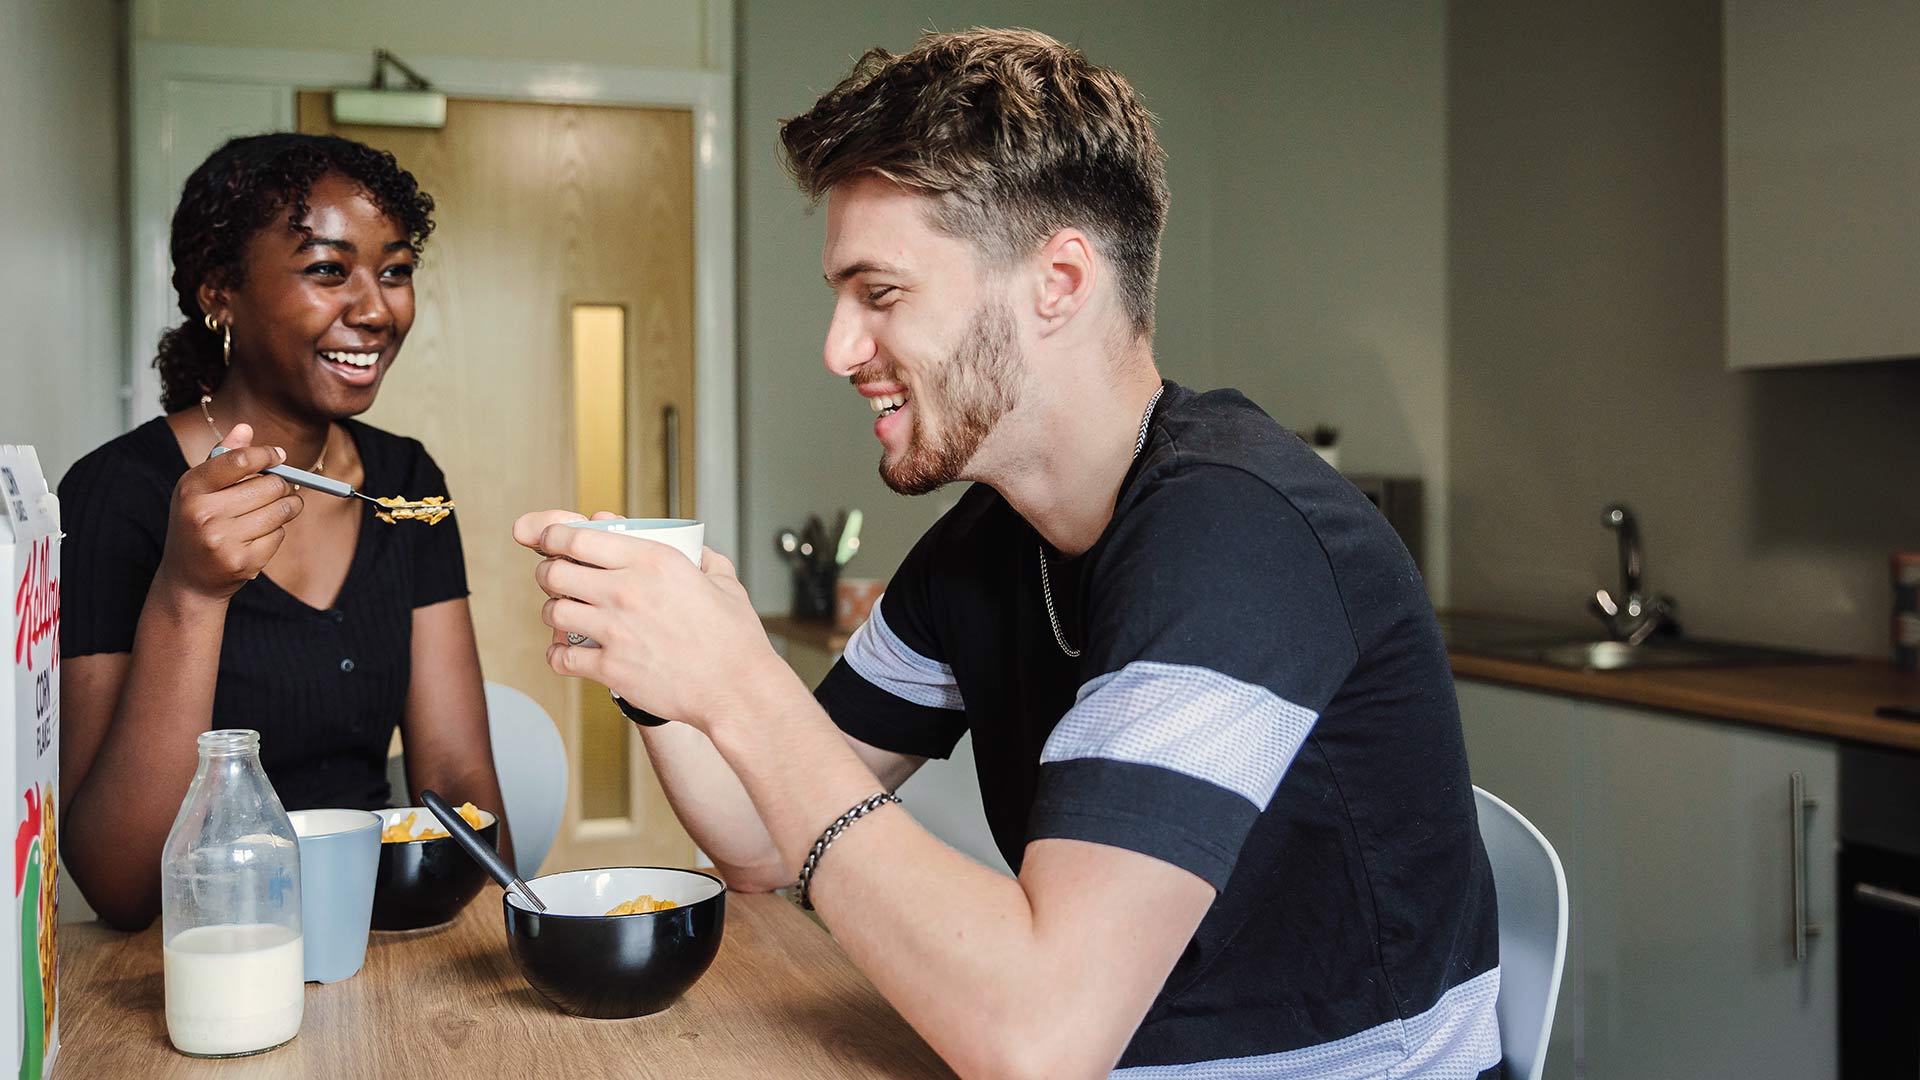 Two students sat together eating breakfast in a kitchen in halls